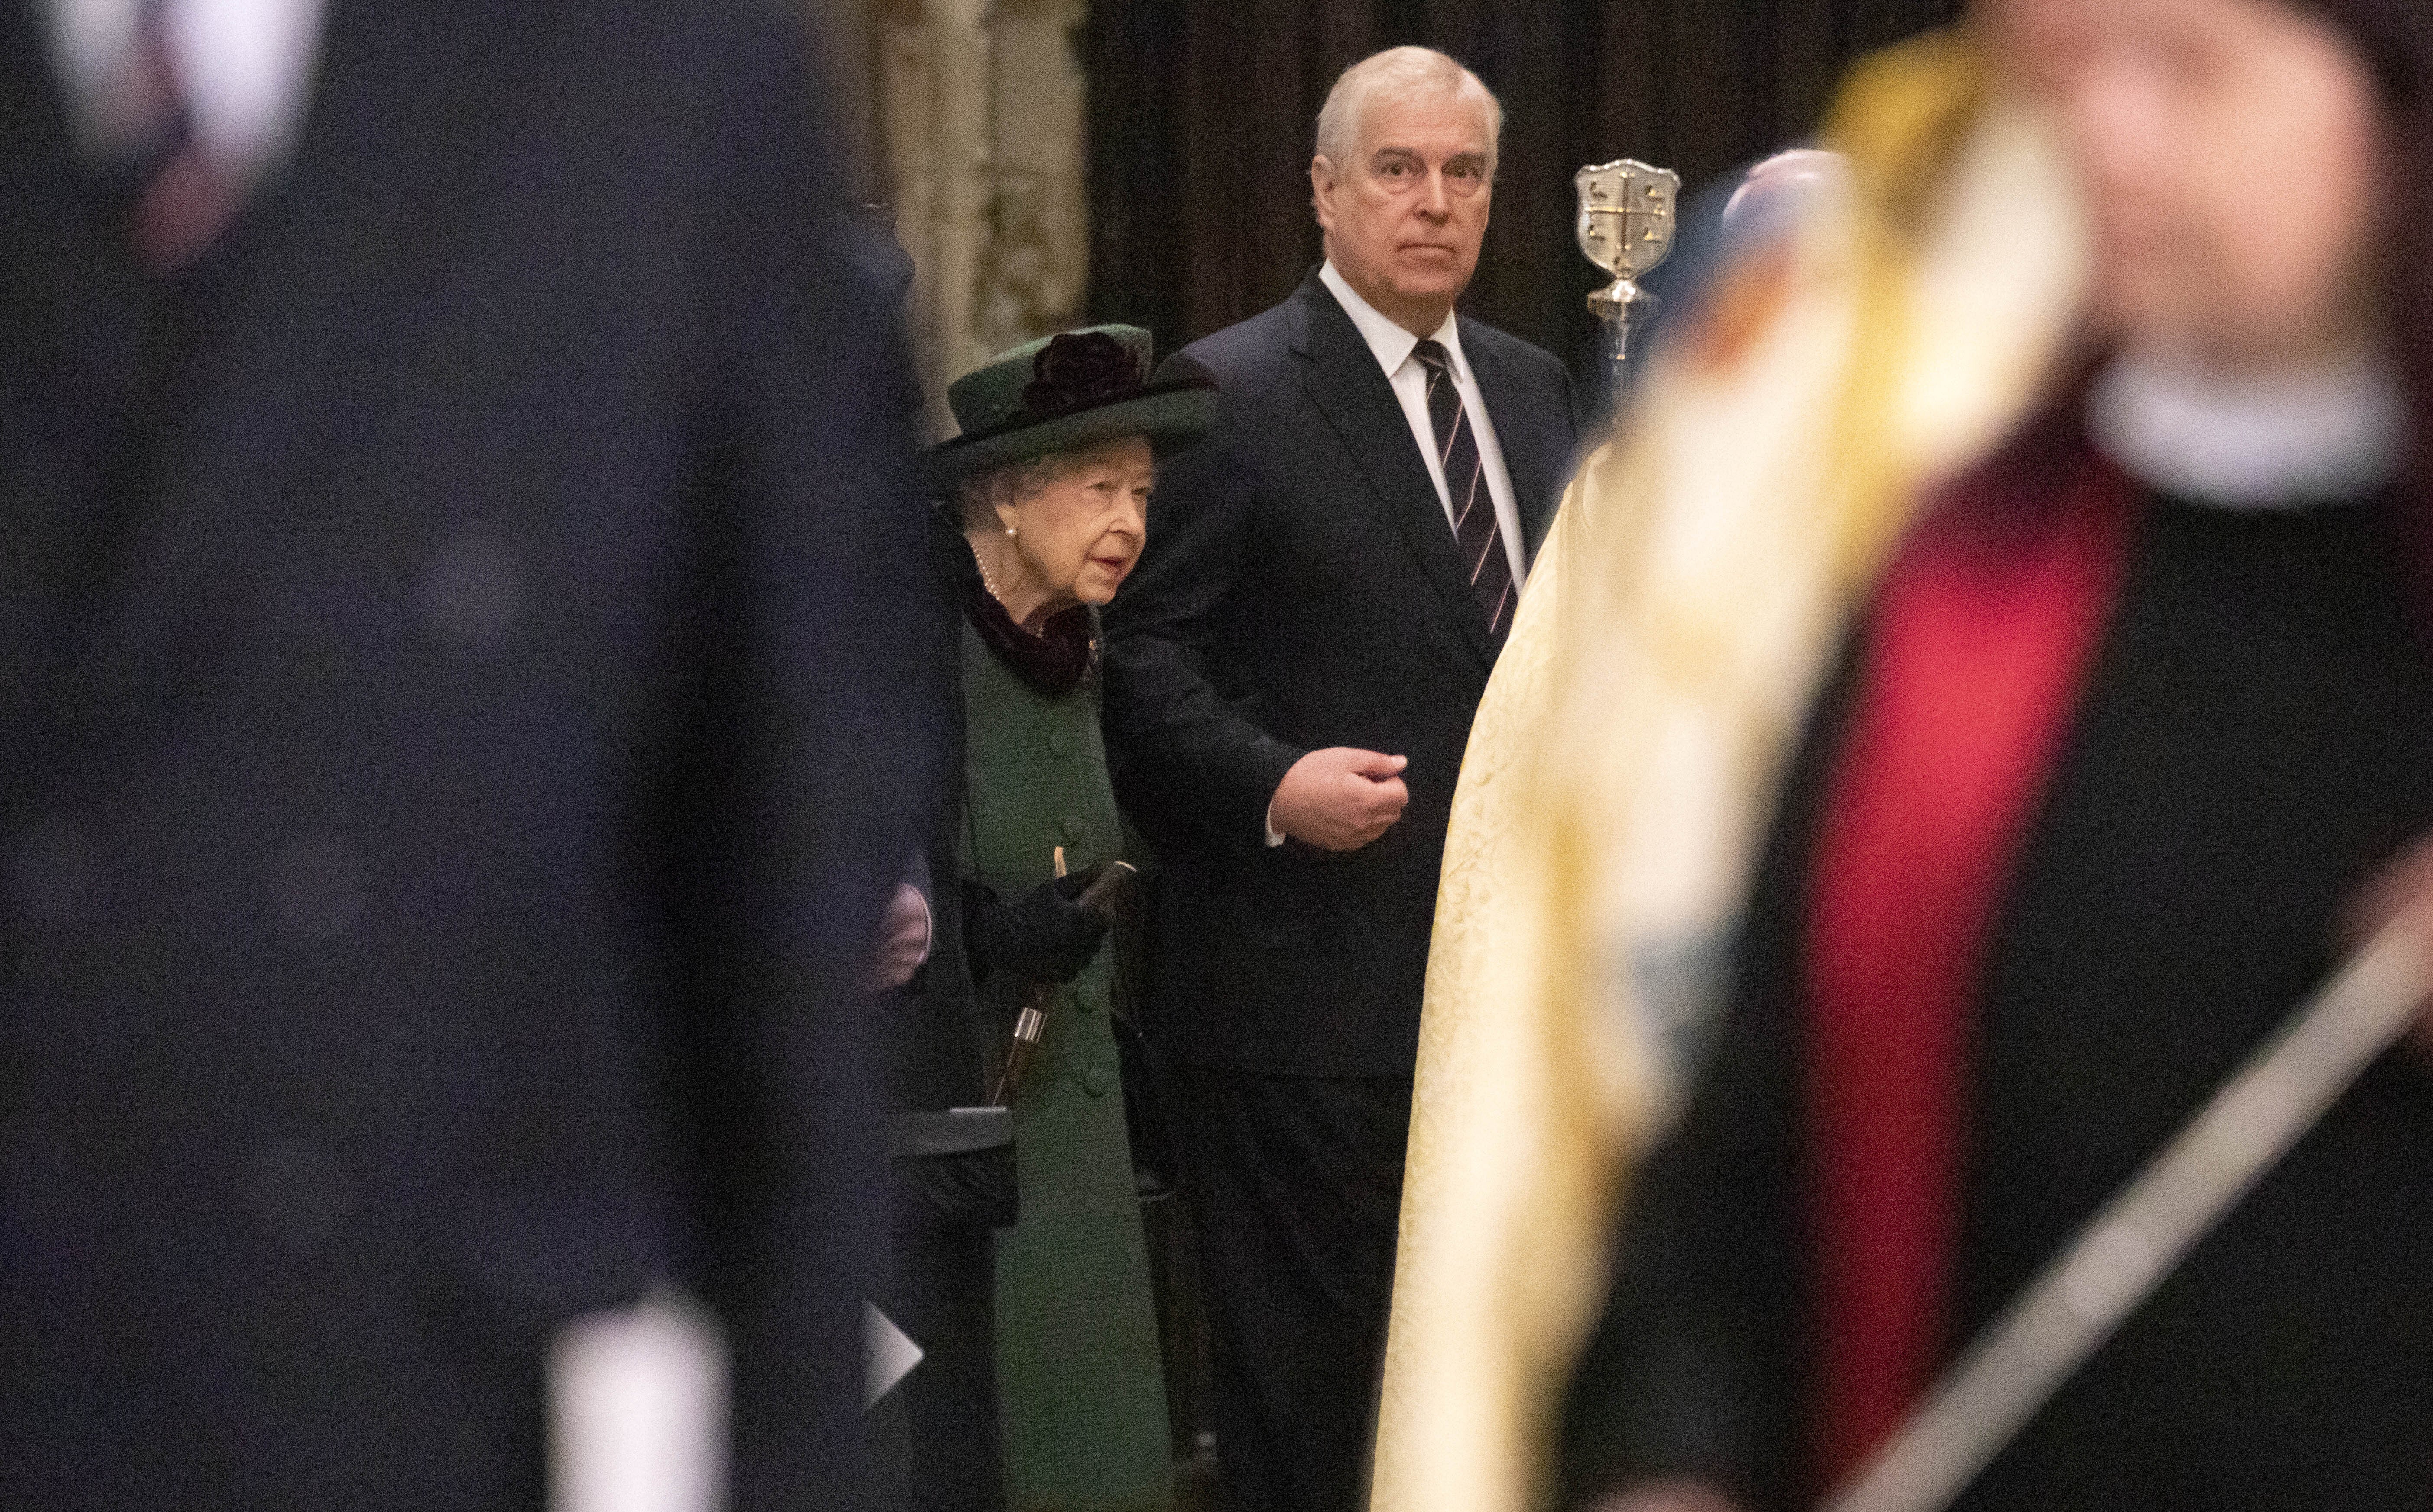 The Queen and Prince Andrew at Prince Philip’s memorial